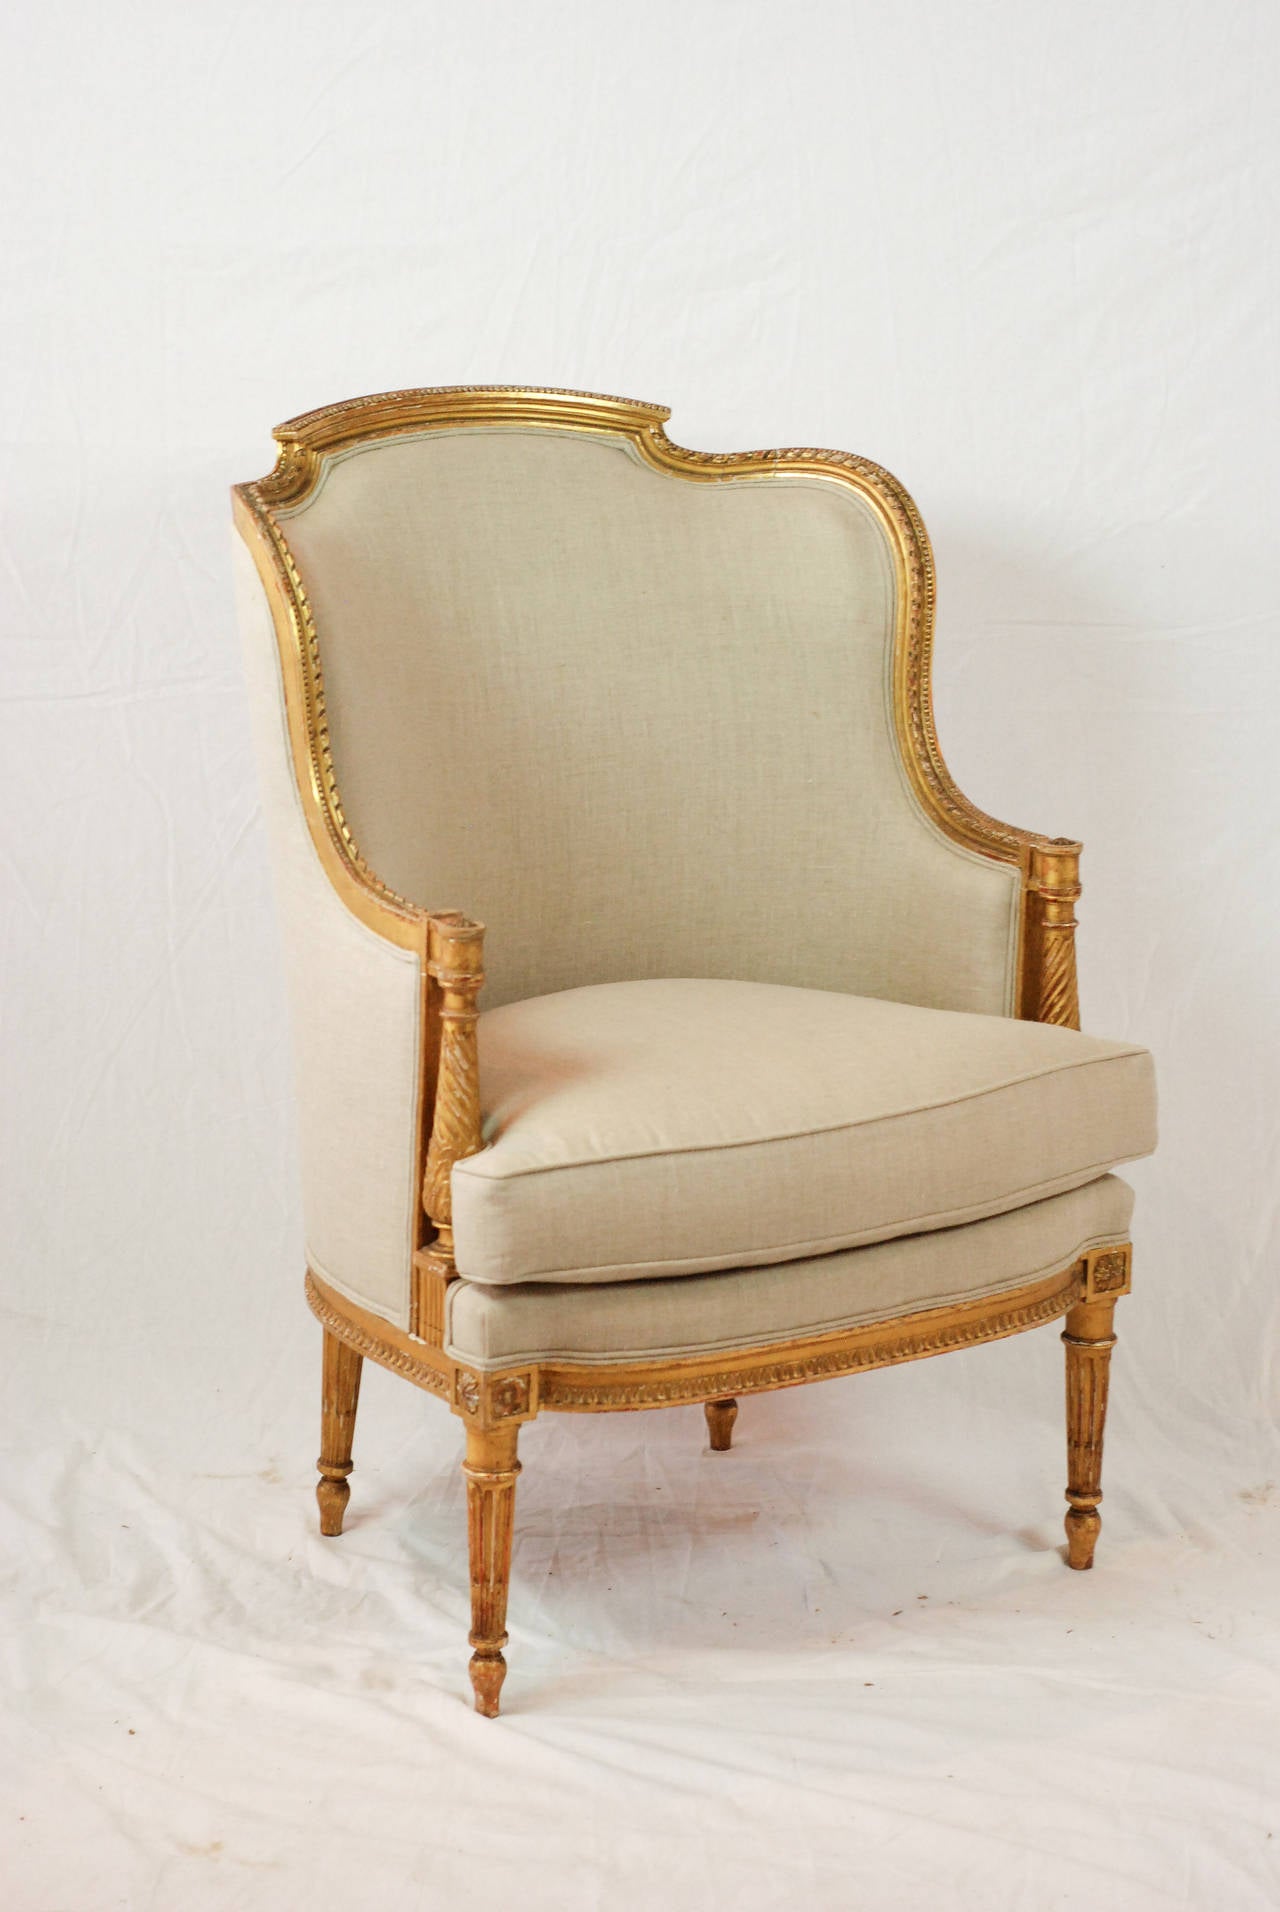 19th century Louis XVI gilded armchair with rounded back, new cushion and newly upholstered in linen.